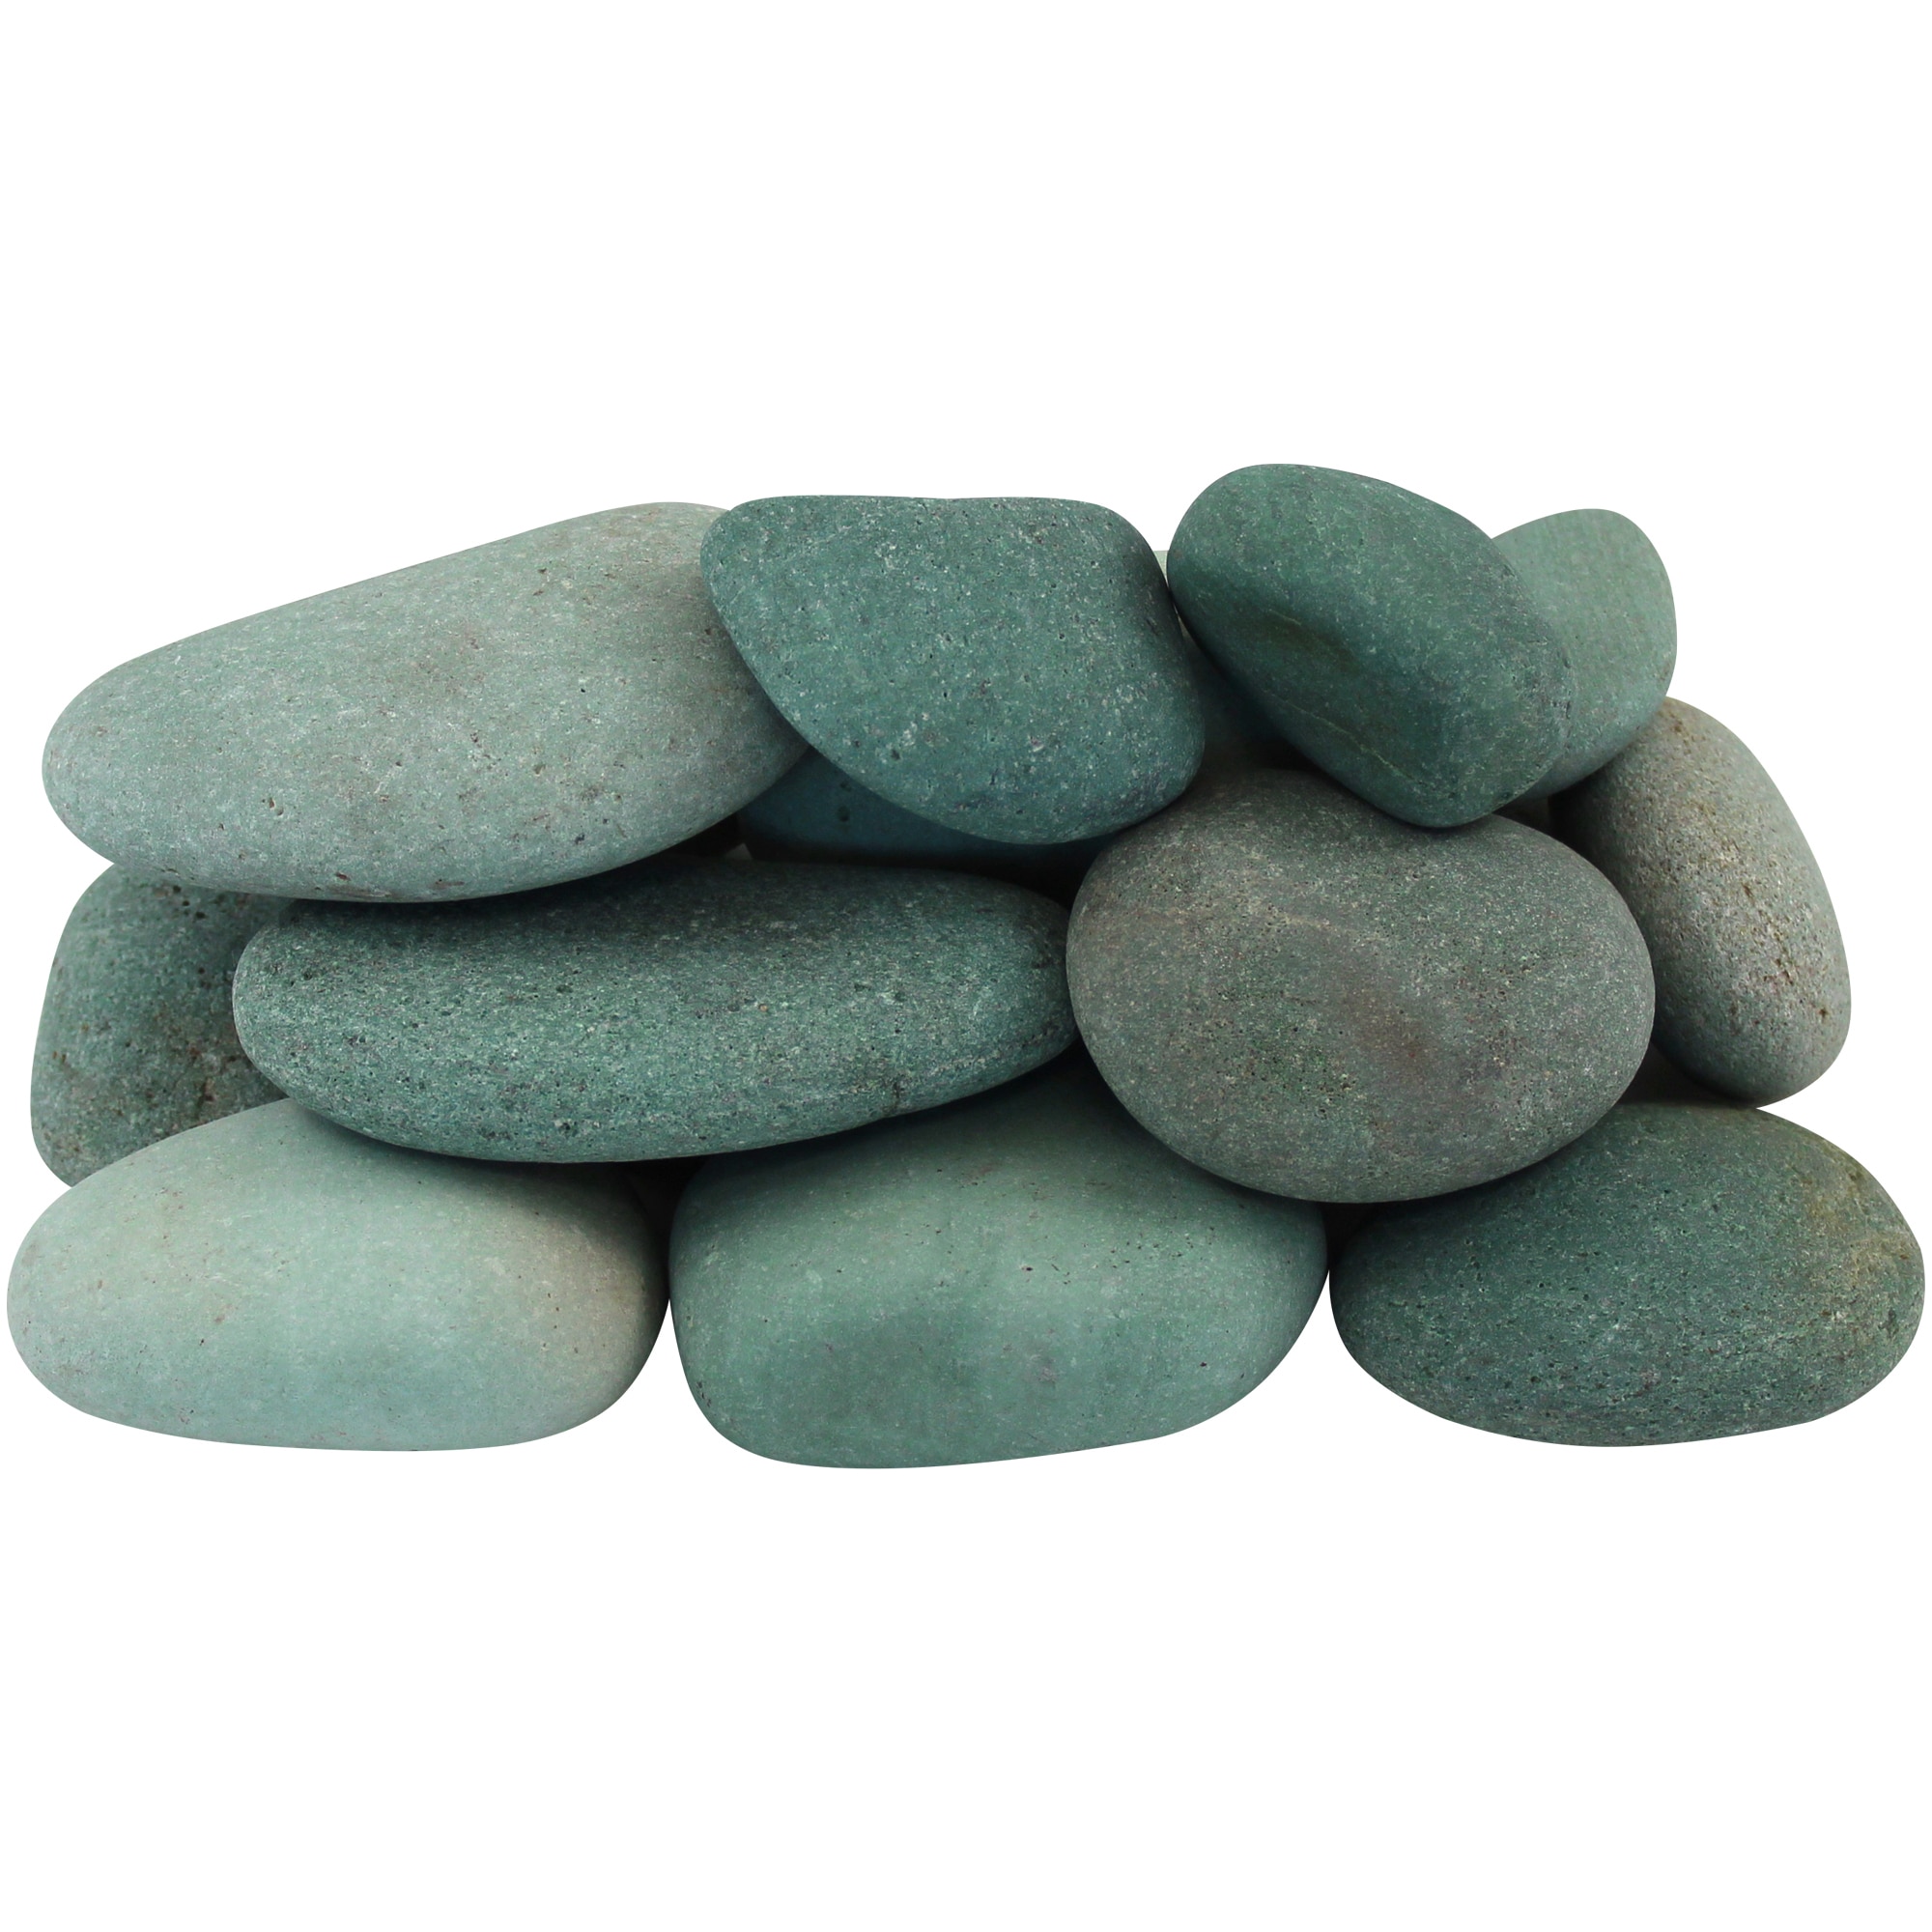 20 River Rocks for Painting, Smooth Stones, No Sharp Edges, 2 to